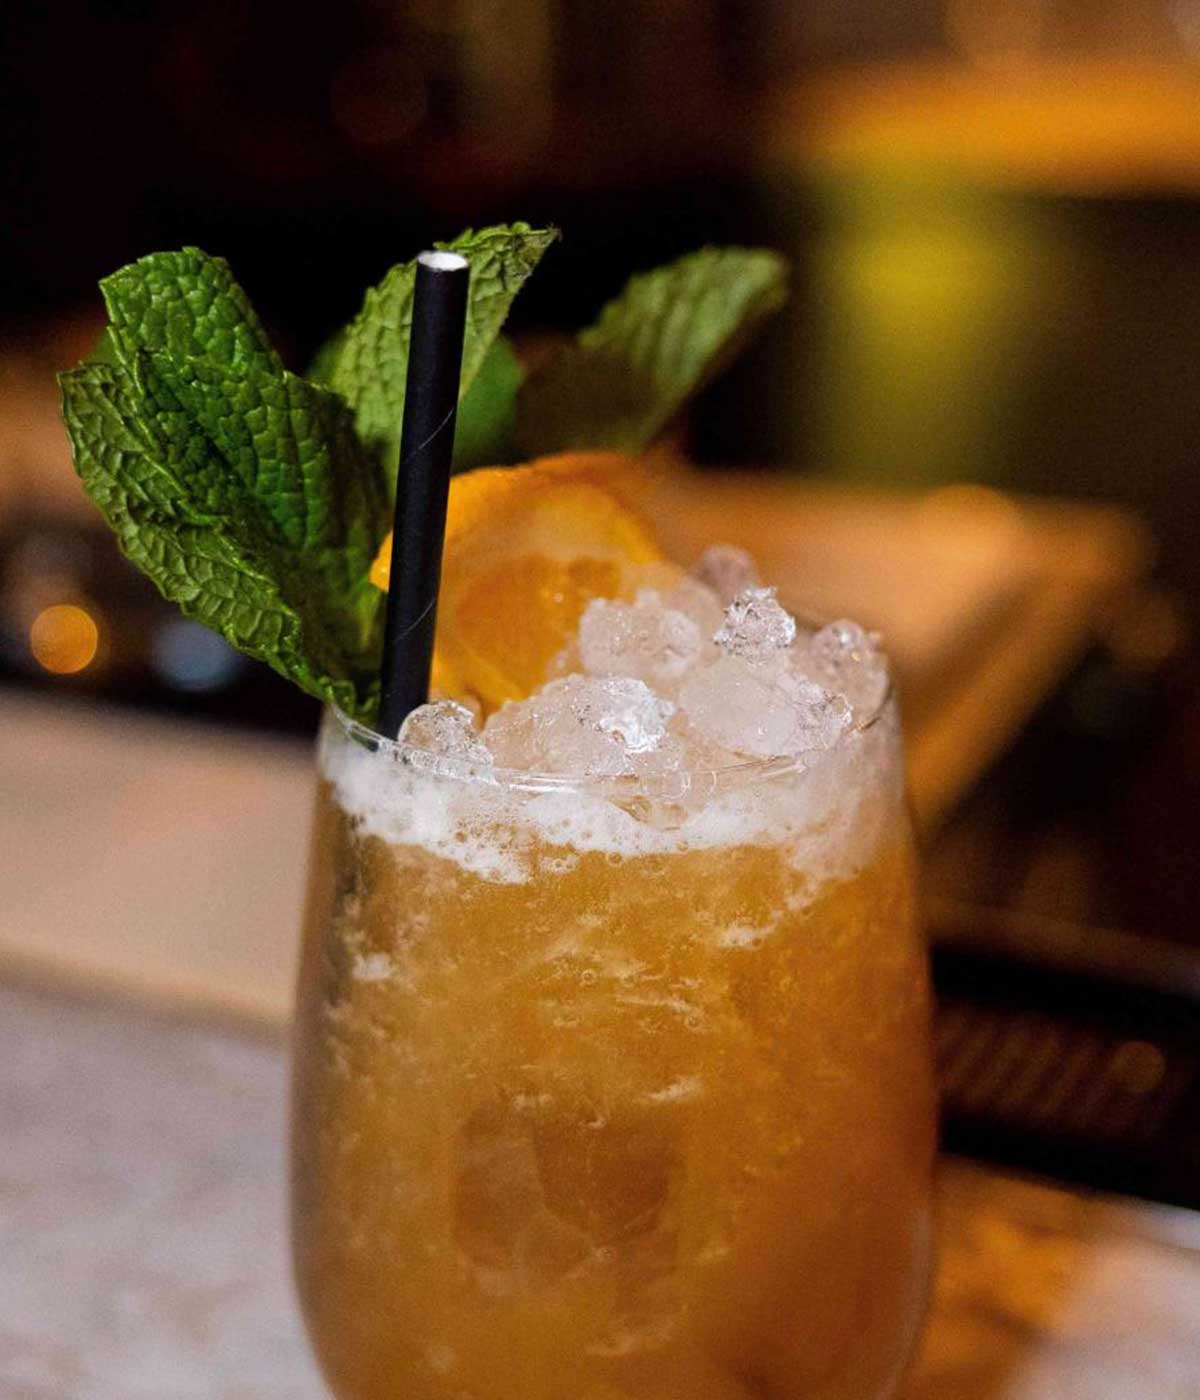 A refreshing icy cocktail made with crushed ice and garnished with mint and orange